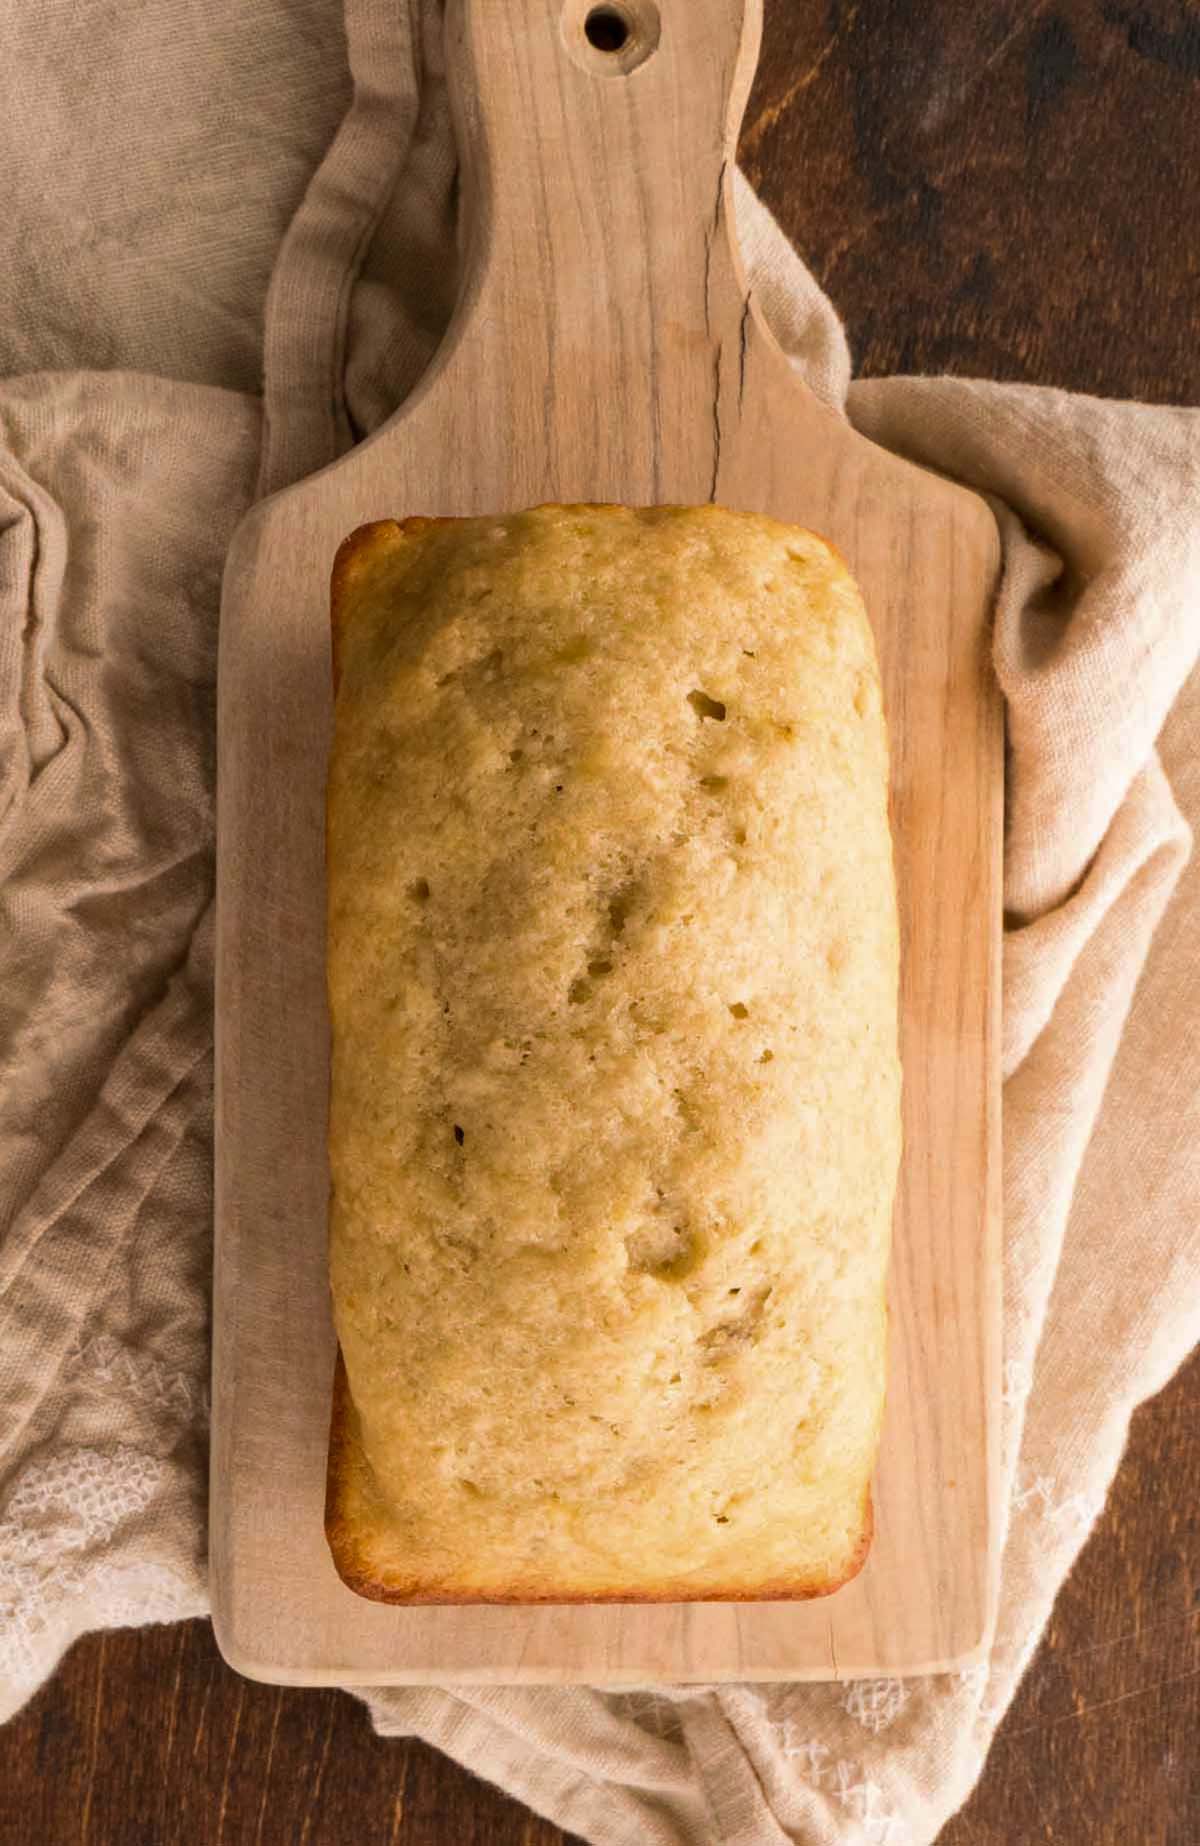 A whole loaf of banana bread on a cutting board.